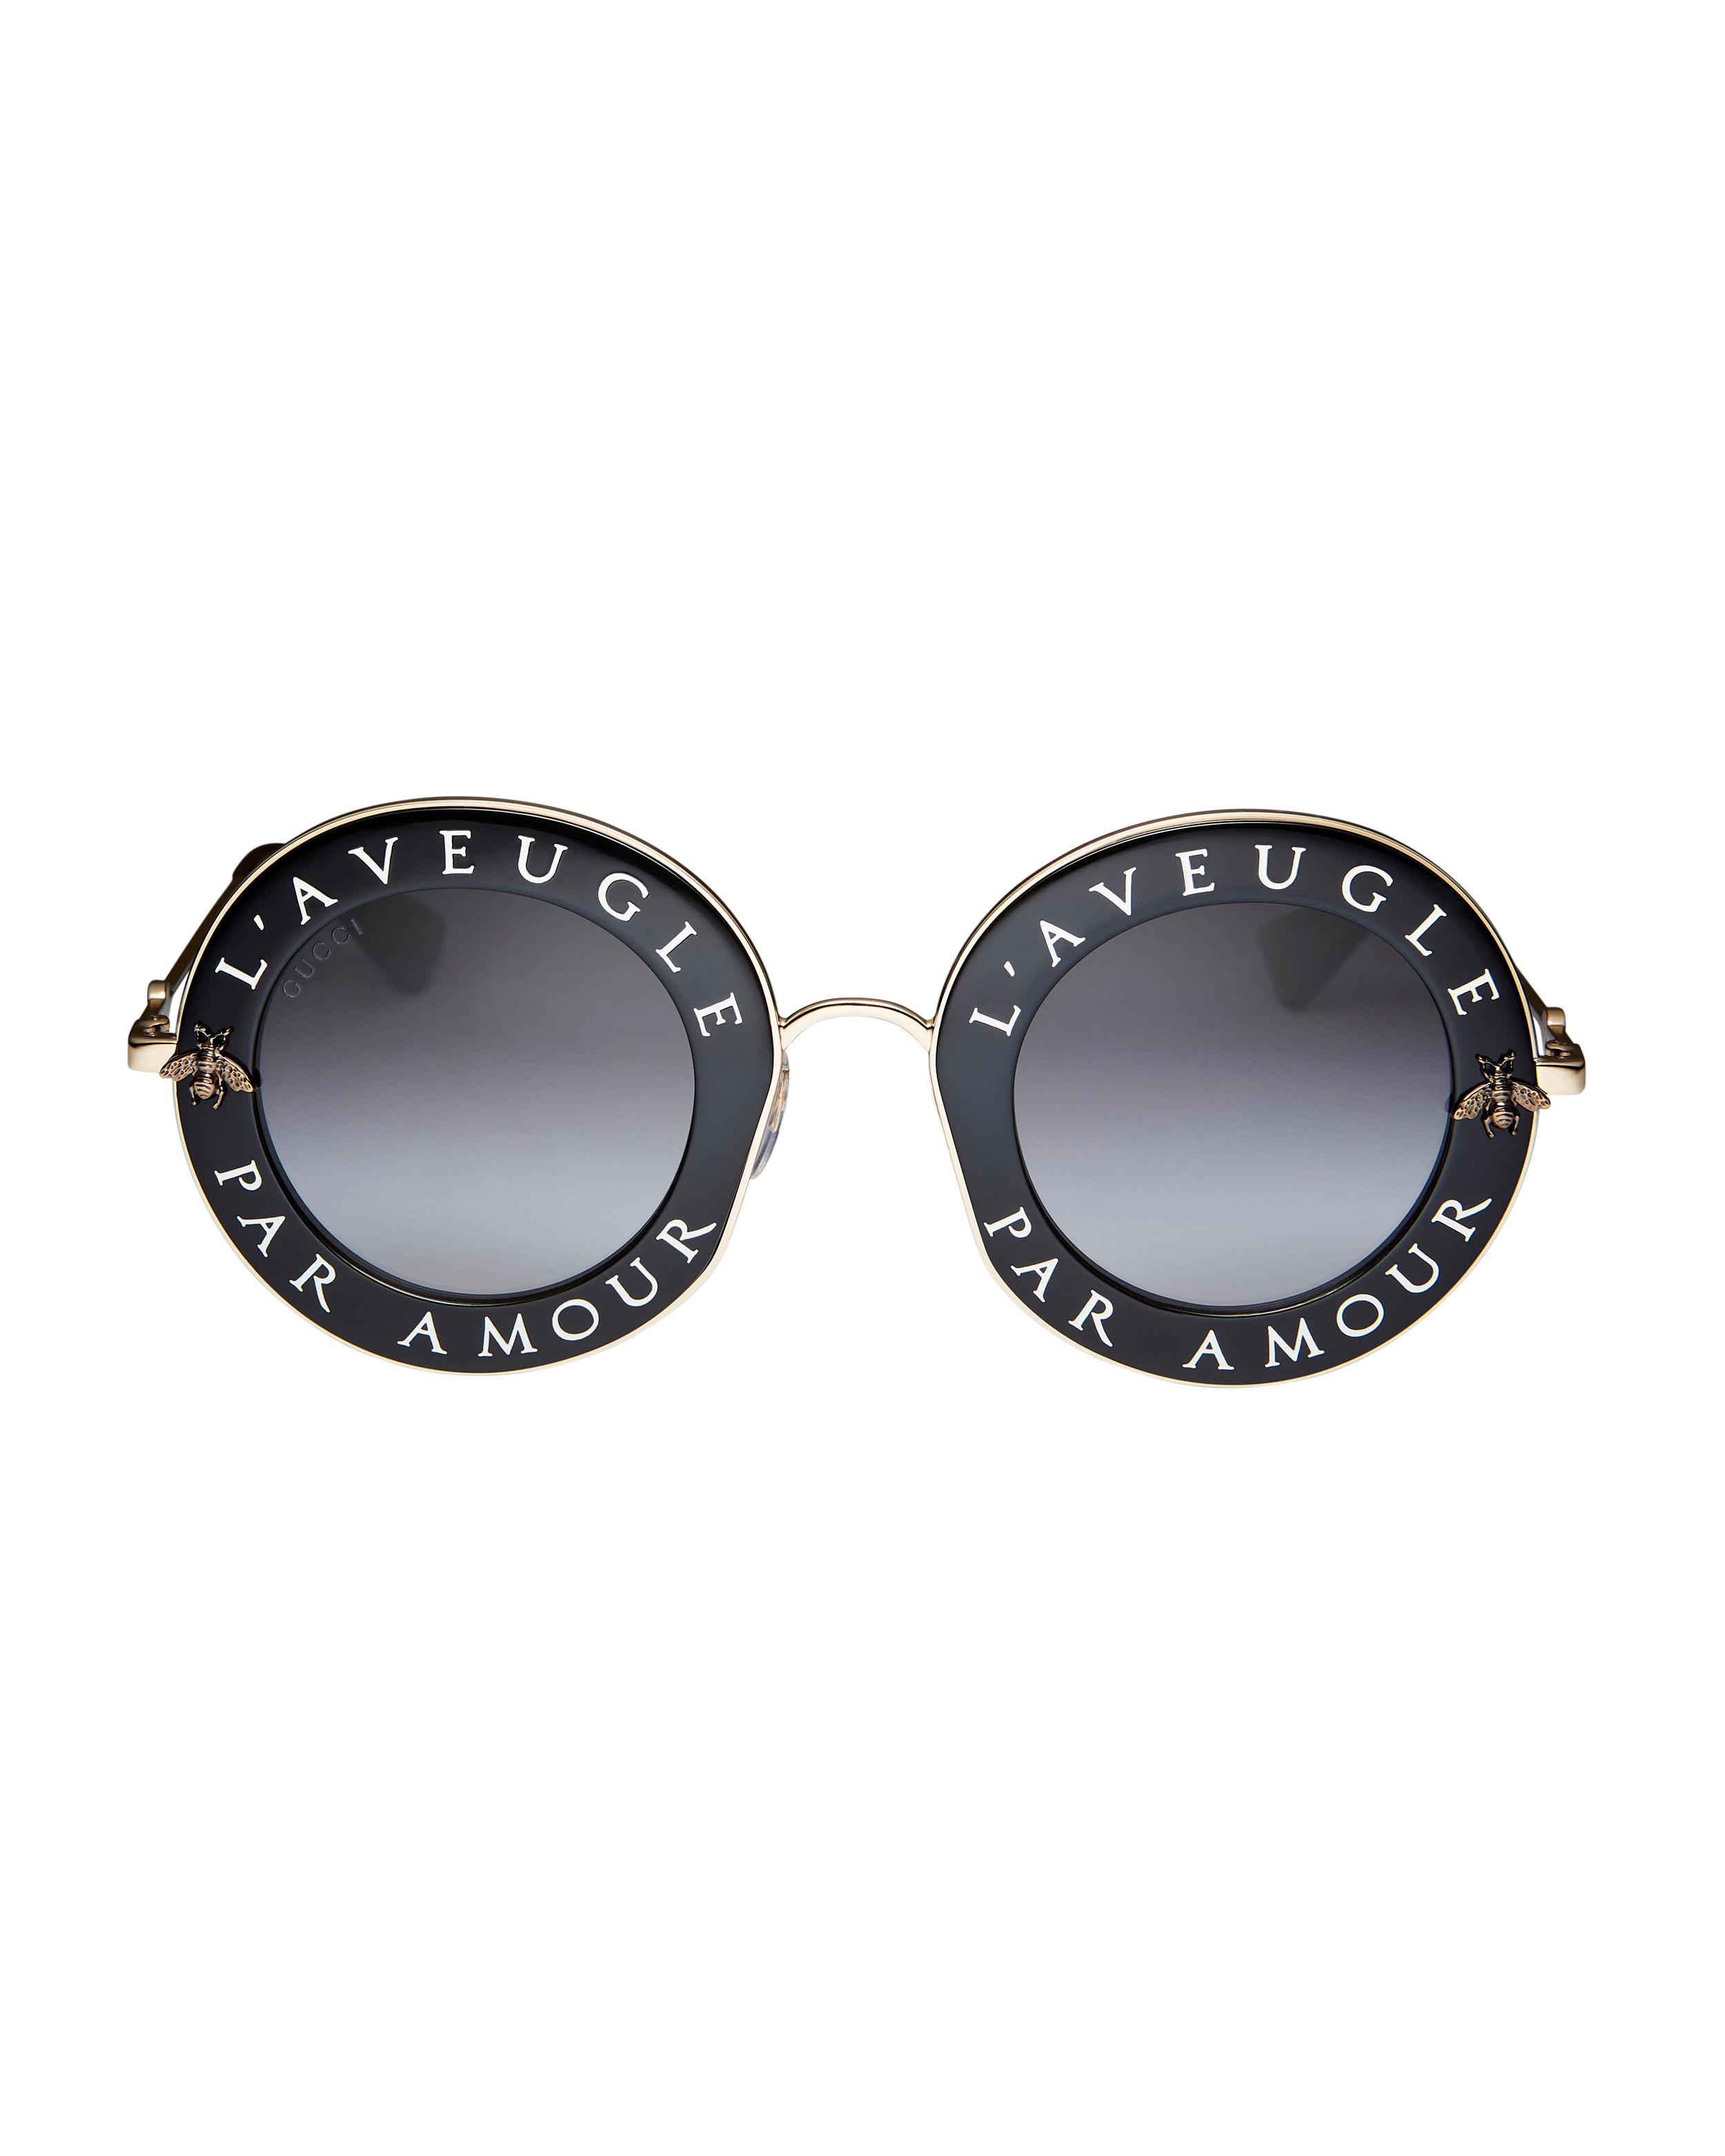 gucci love is blind sunglasses, OFF 74 